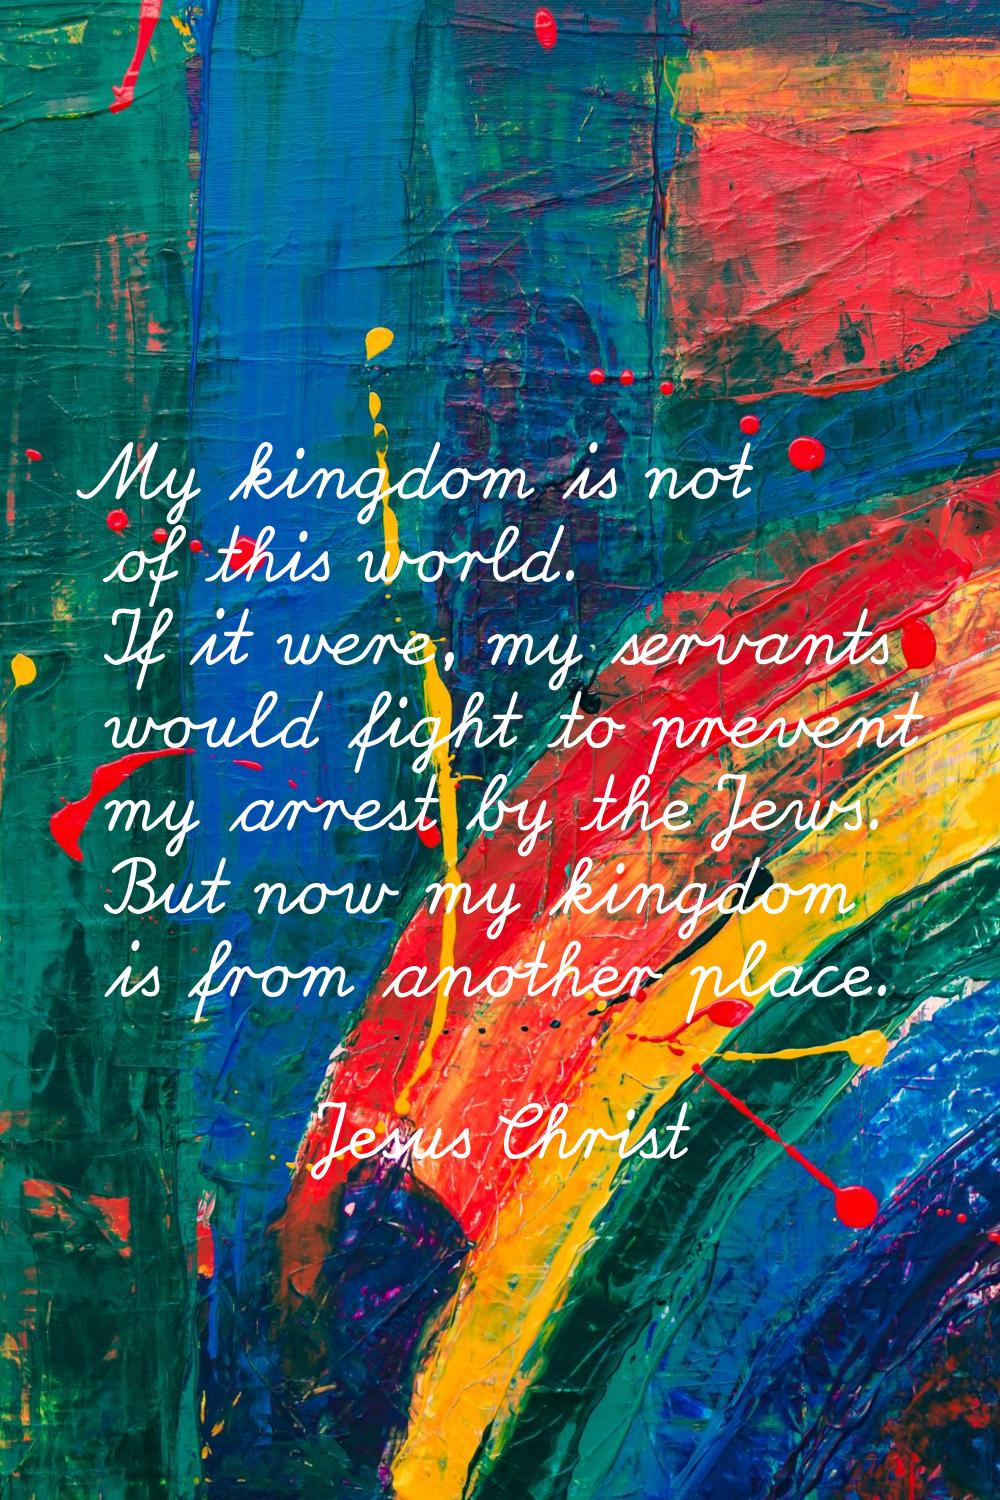 My kingdom is not of this world. If it were, my servants would fight to prevent my arrest by the Je